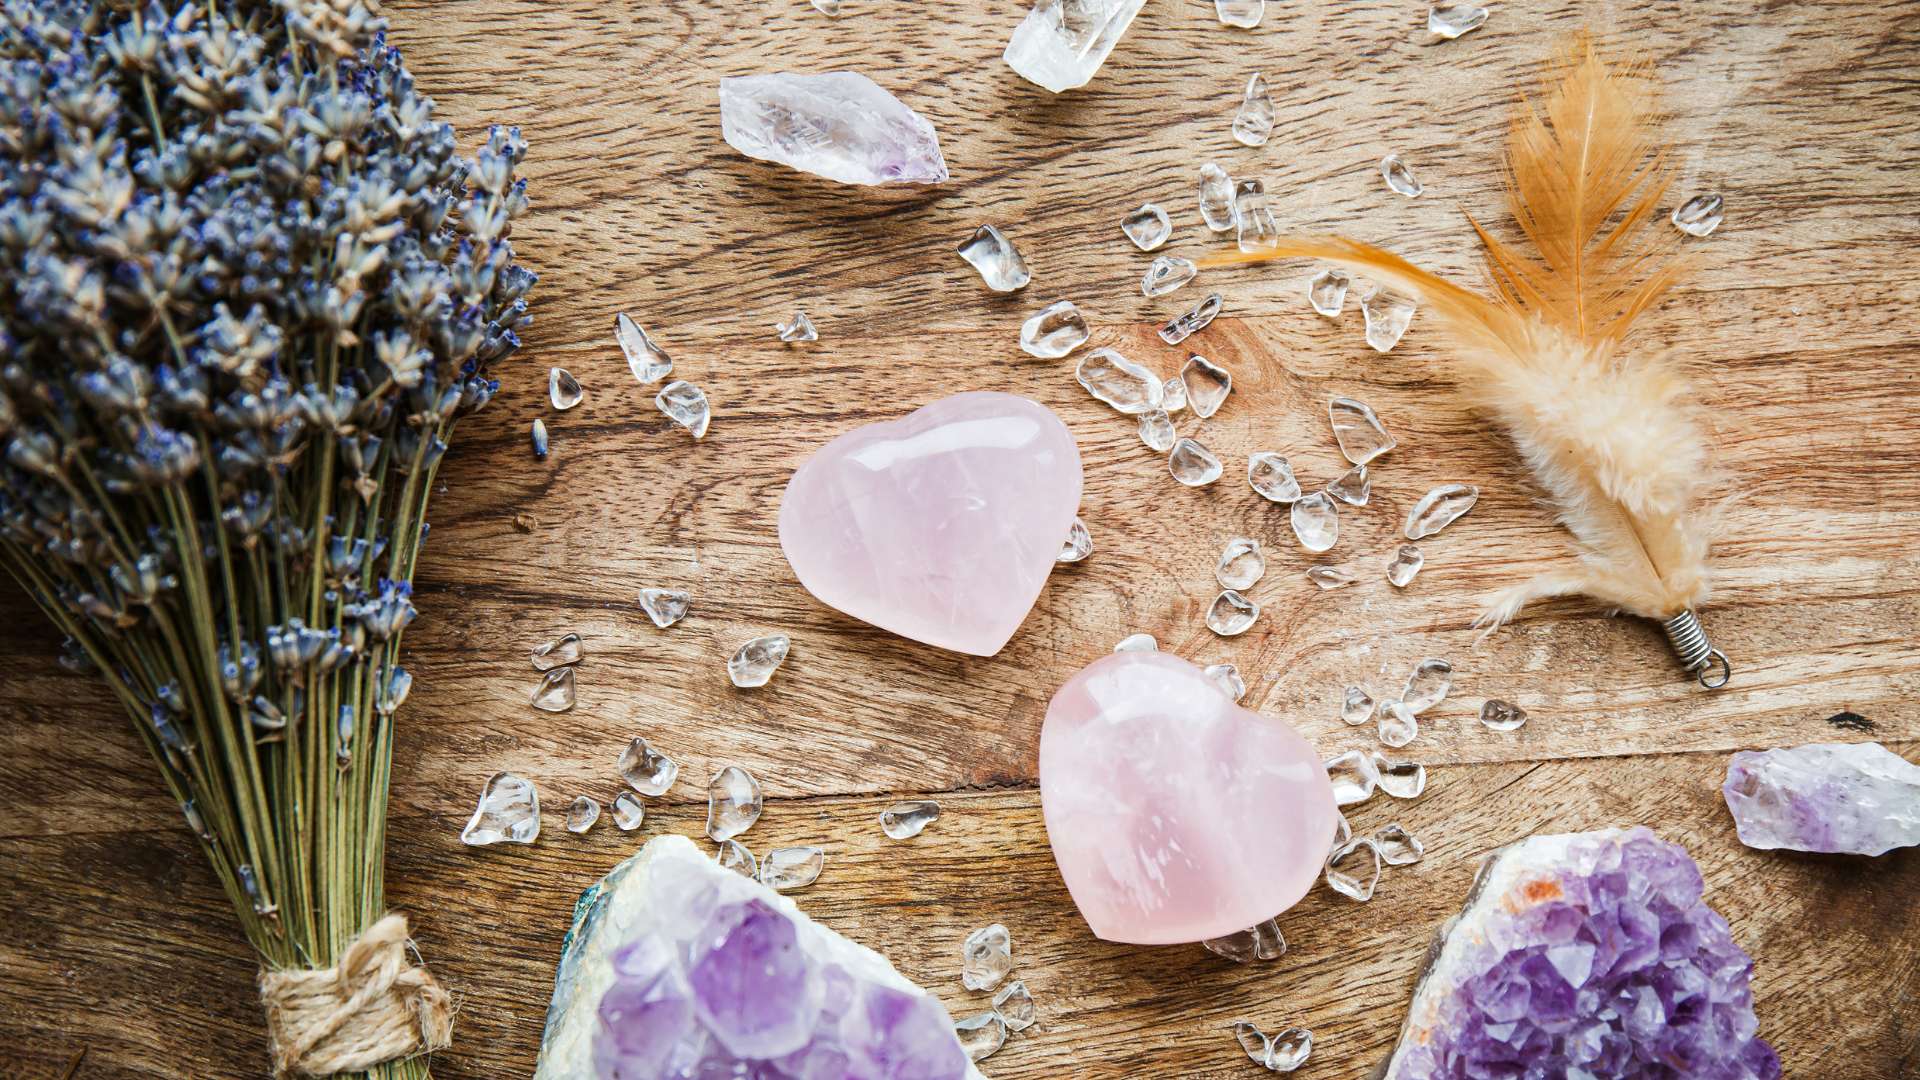 Emotional Balance Healing Crystal Intention Set with Rhodonite, Lepidolite  and ite